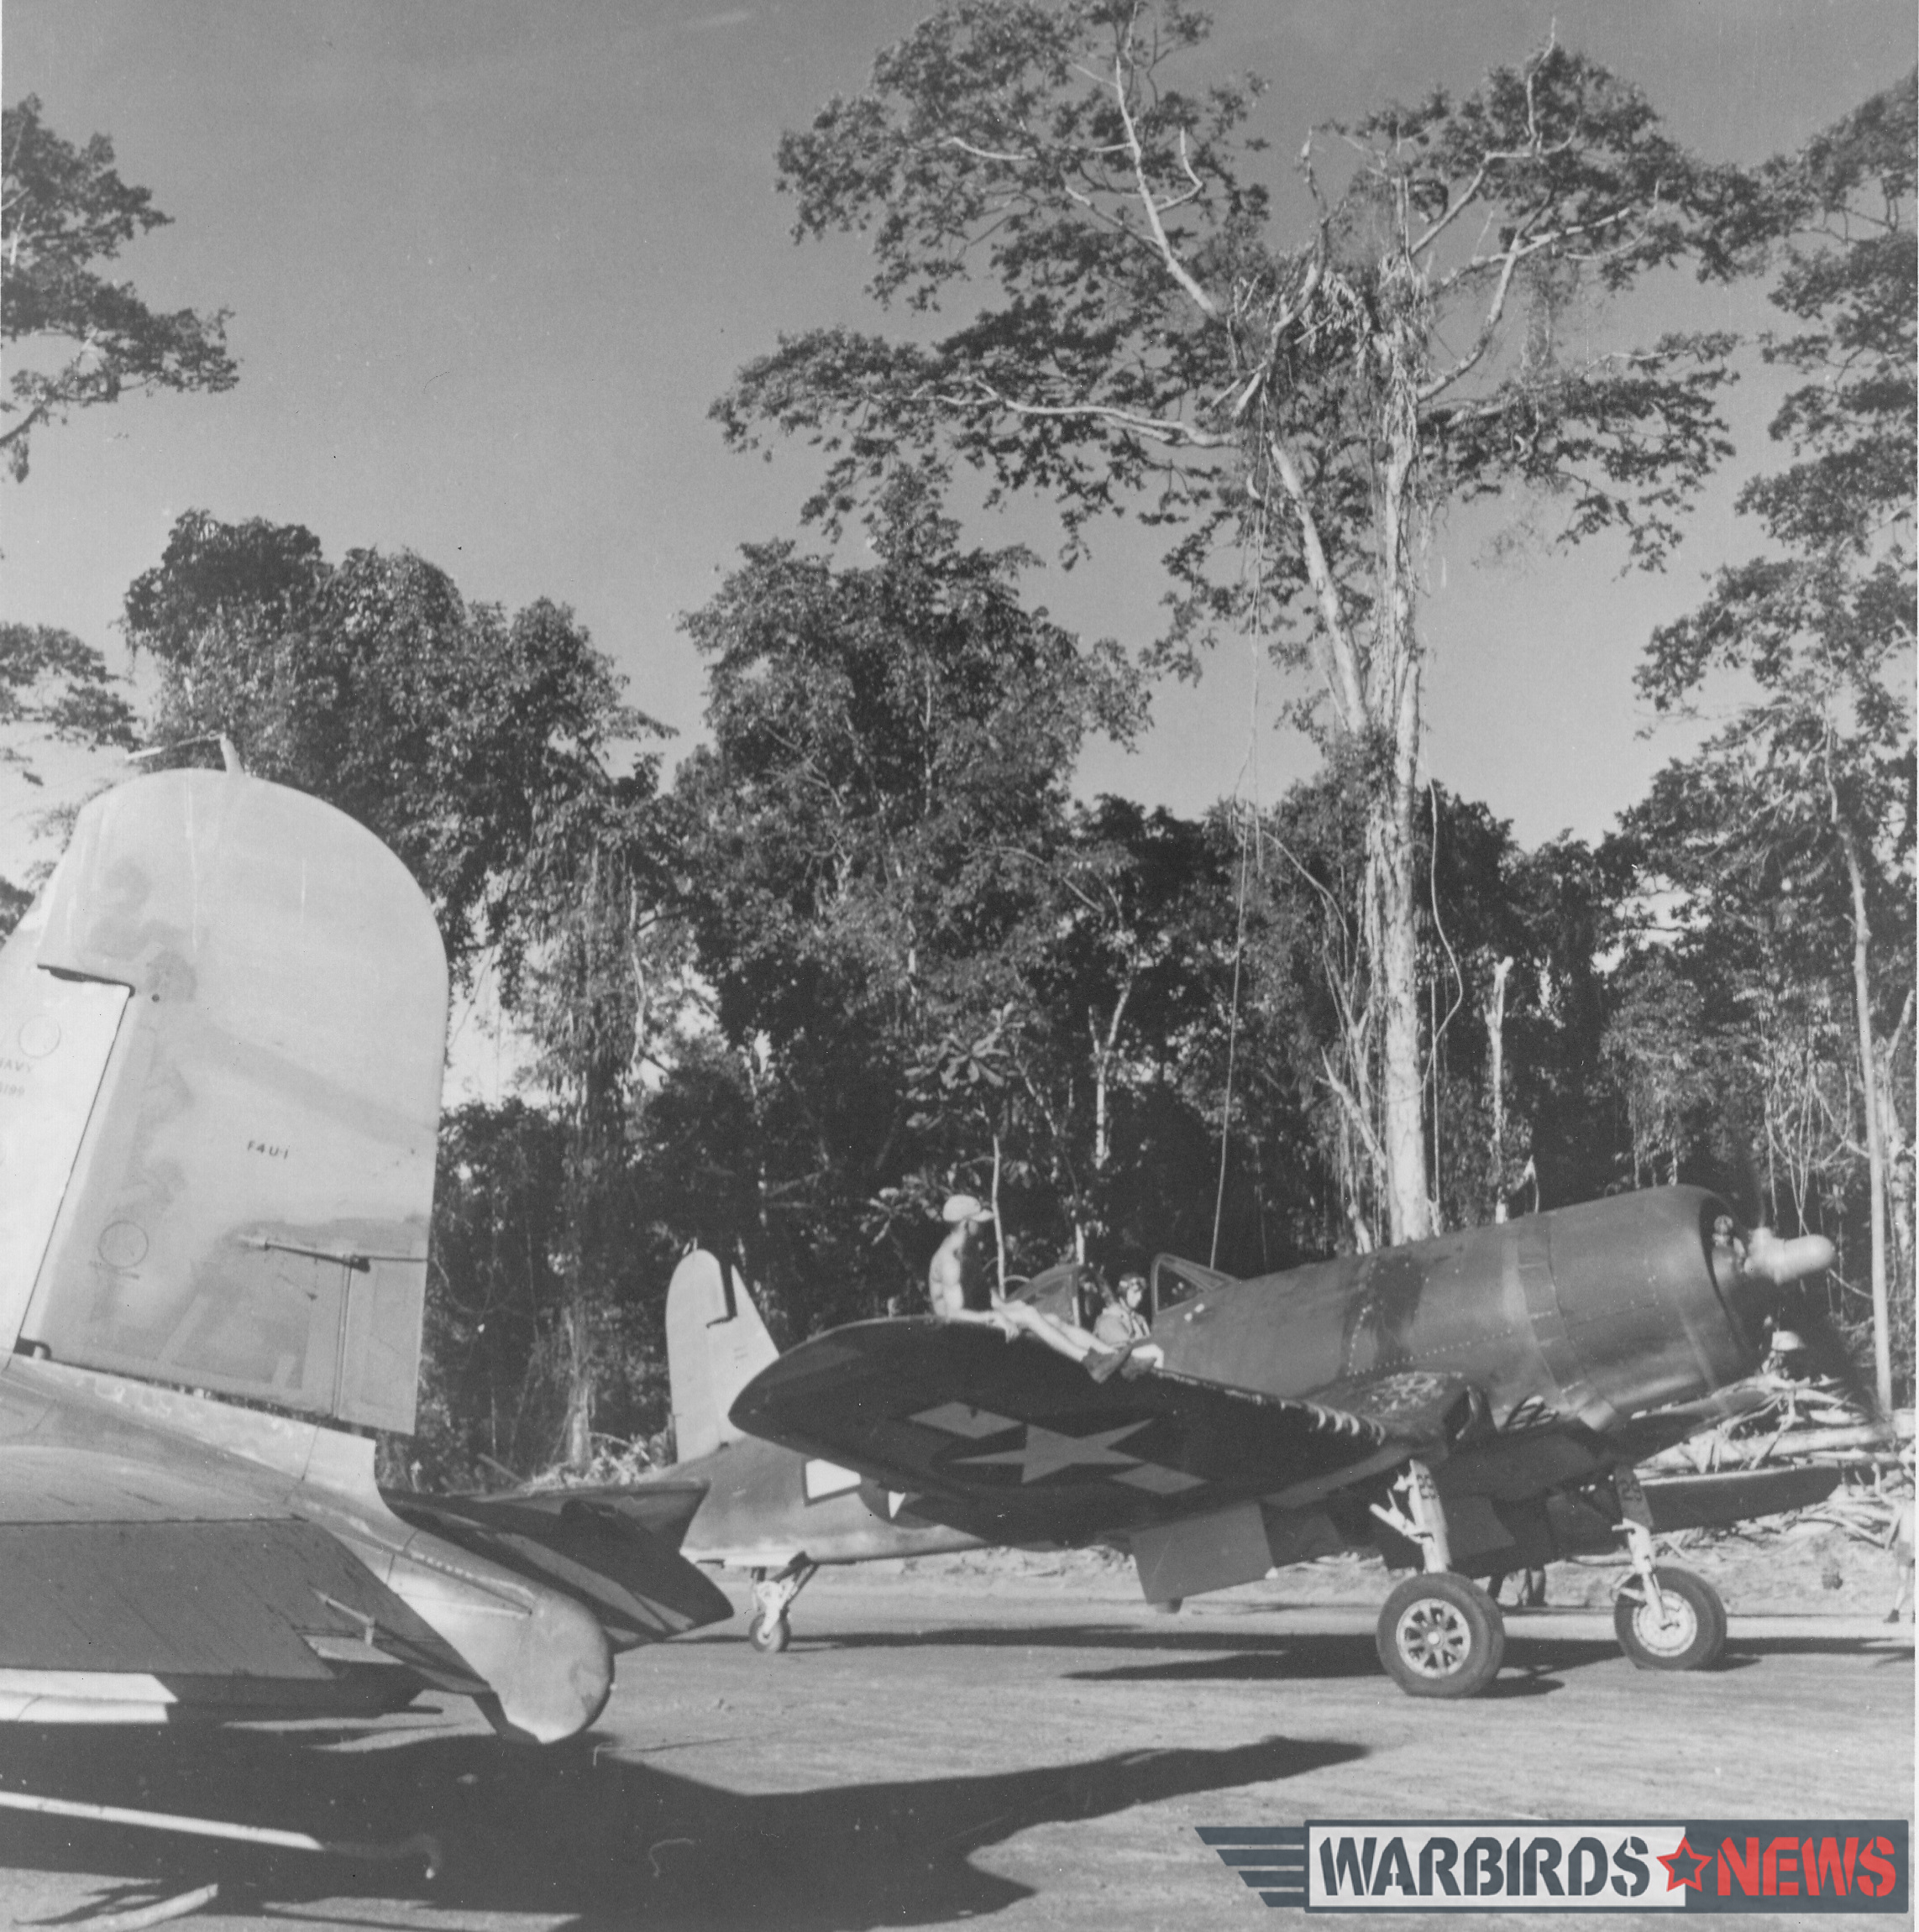 Most of the Navy fighter squadrons in the Solomons were equipped with F6F Hellcats, but VF-17, led by Lt. Cdr. John “Tommy” Blackburn, deployed to the South Pacific with Corsairs. During two combat tours in the Solomons, the “Jolly Rogers” were officially credited with more than 150 aerial victories and produced 11 aces. Pictured is the squadron’s top ace, Ira “Ike” Kepford (16 victories), taxiing from a revetment on Bougainville prior to a mission against Rabaul. Photo credit: Bruce Gamble collection via National Archives